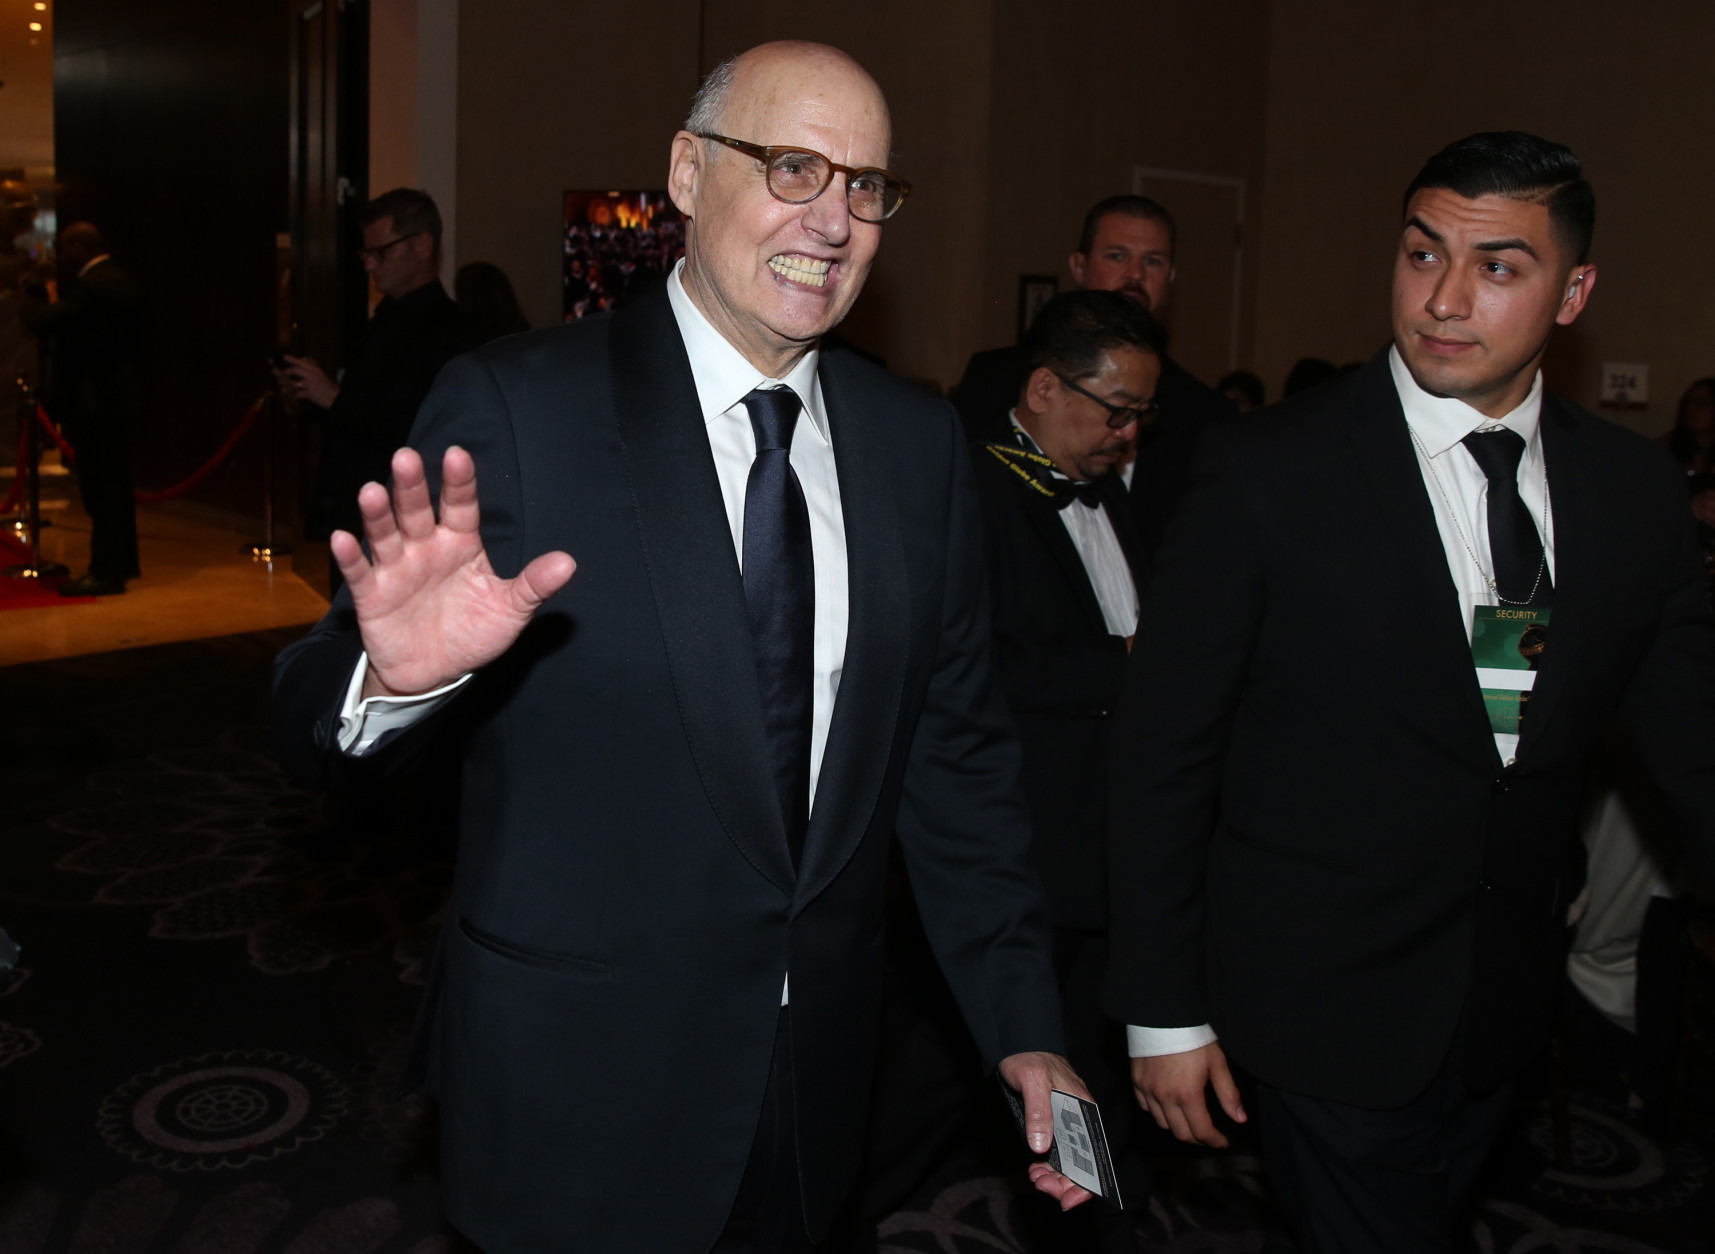 Jeffrey Tambor walks in the audience at the 72nd annual Golden Globe Awards at the Beverly Hilton Hotel on Sunday, Jan. 11, 2015, in Beverly Hills, Calif. (Photo by Matt Sayles/Invision/AP)